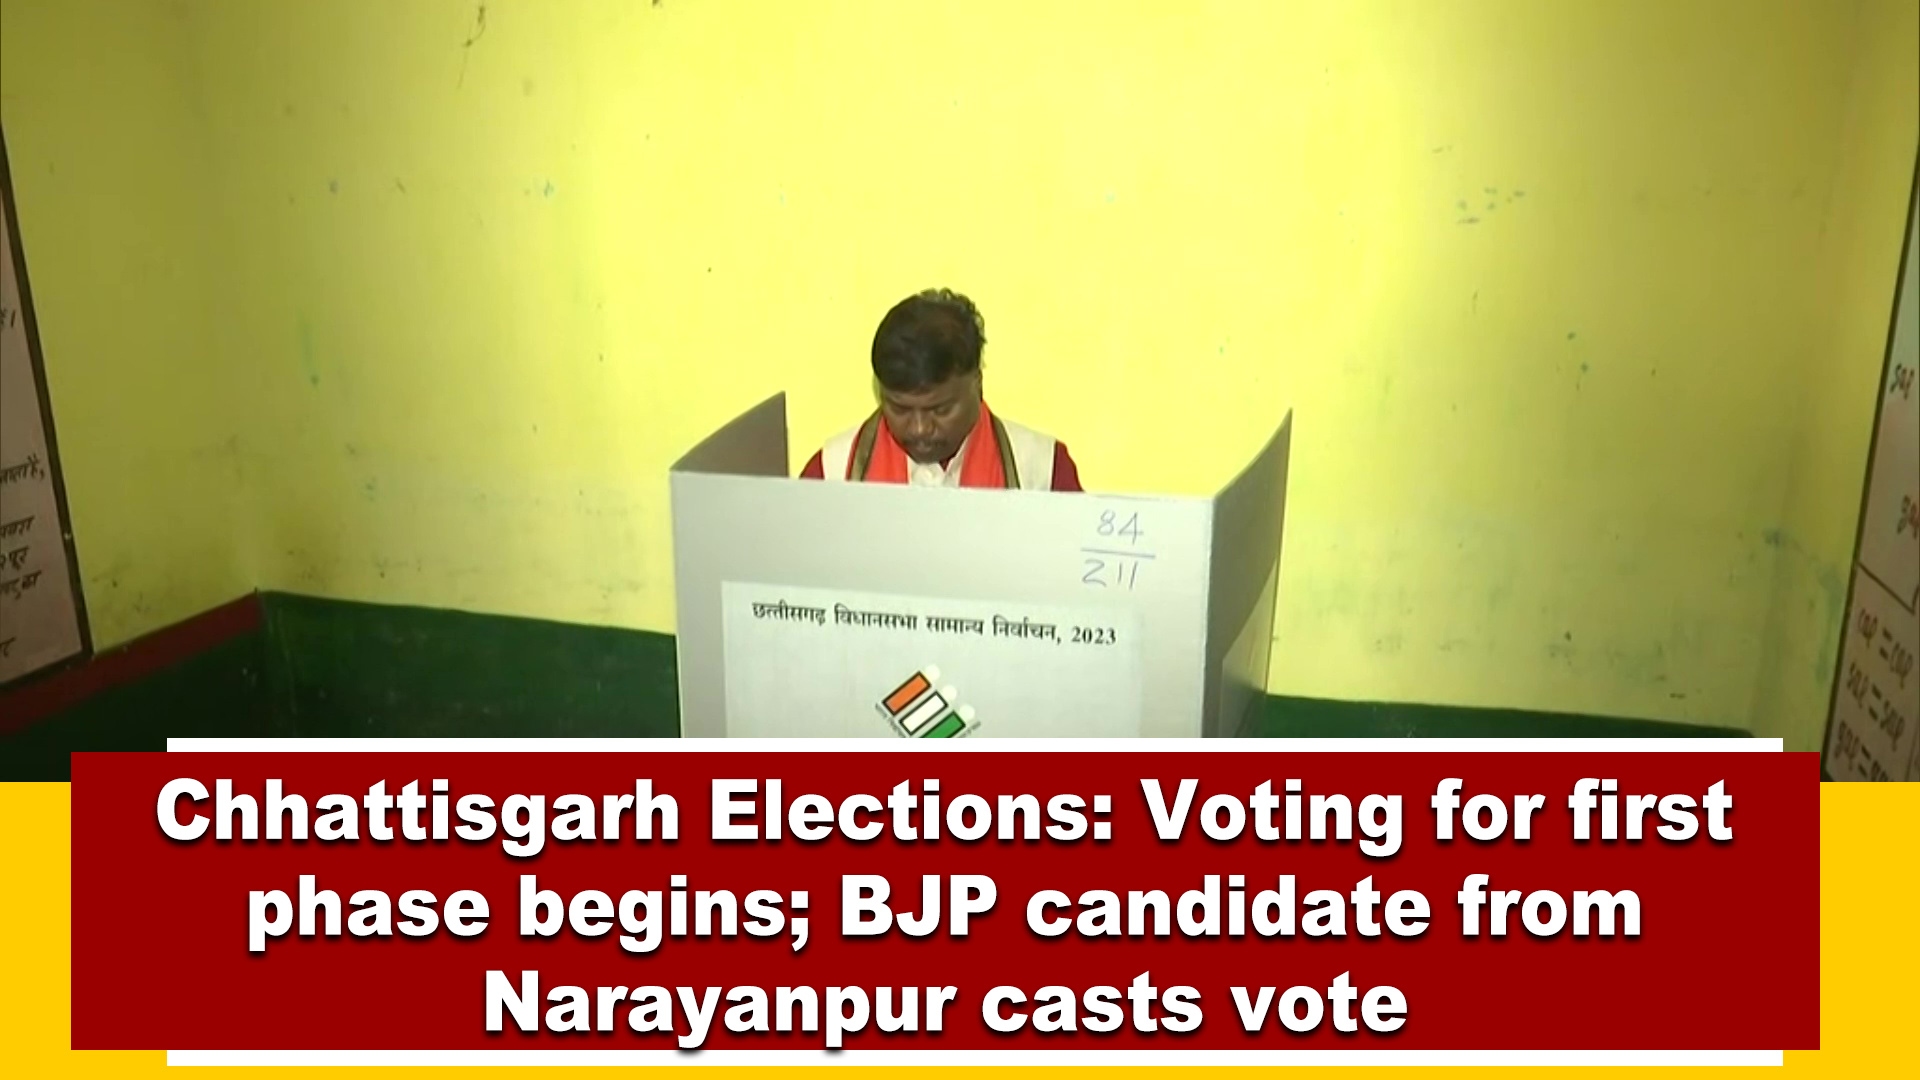 Chhattisgarh Elections: Voting for first phase begins; BJP candidate from Narayanpur casts vote